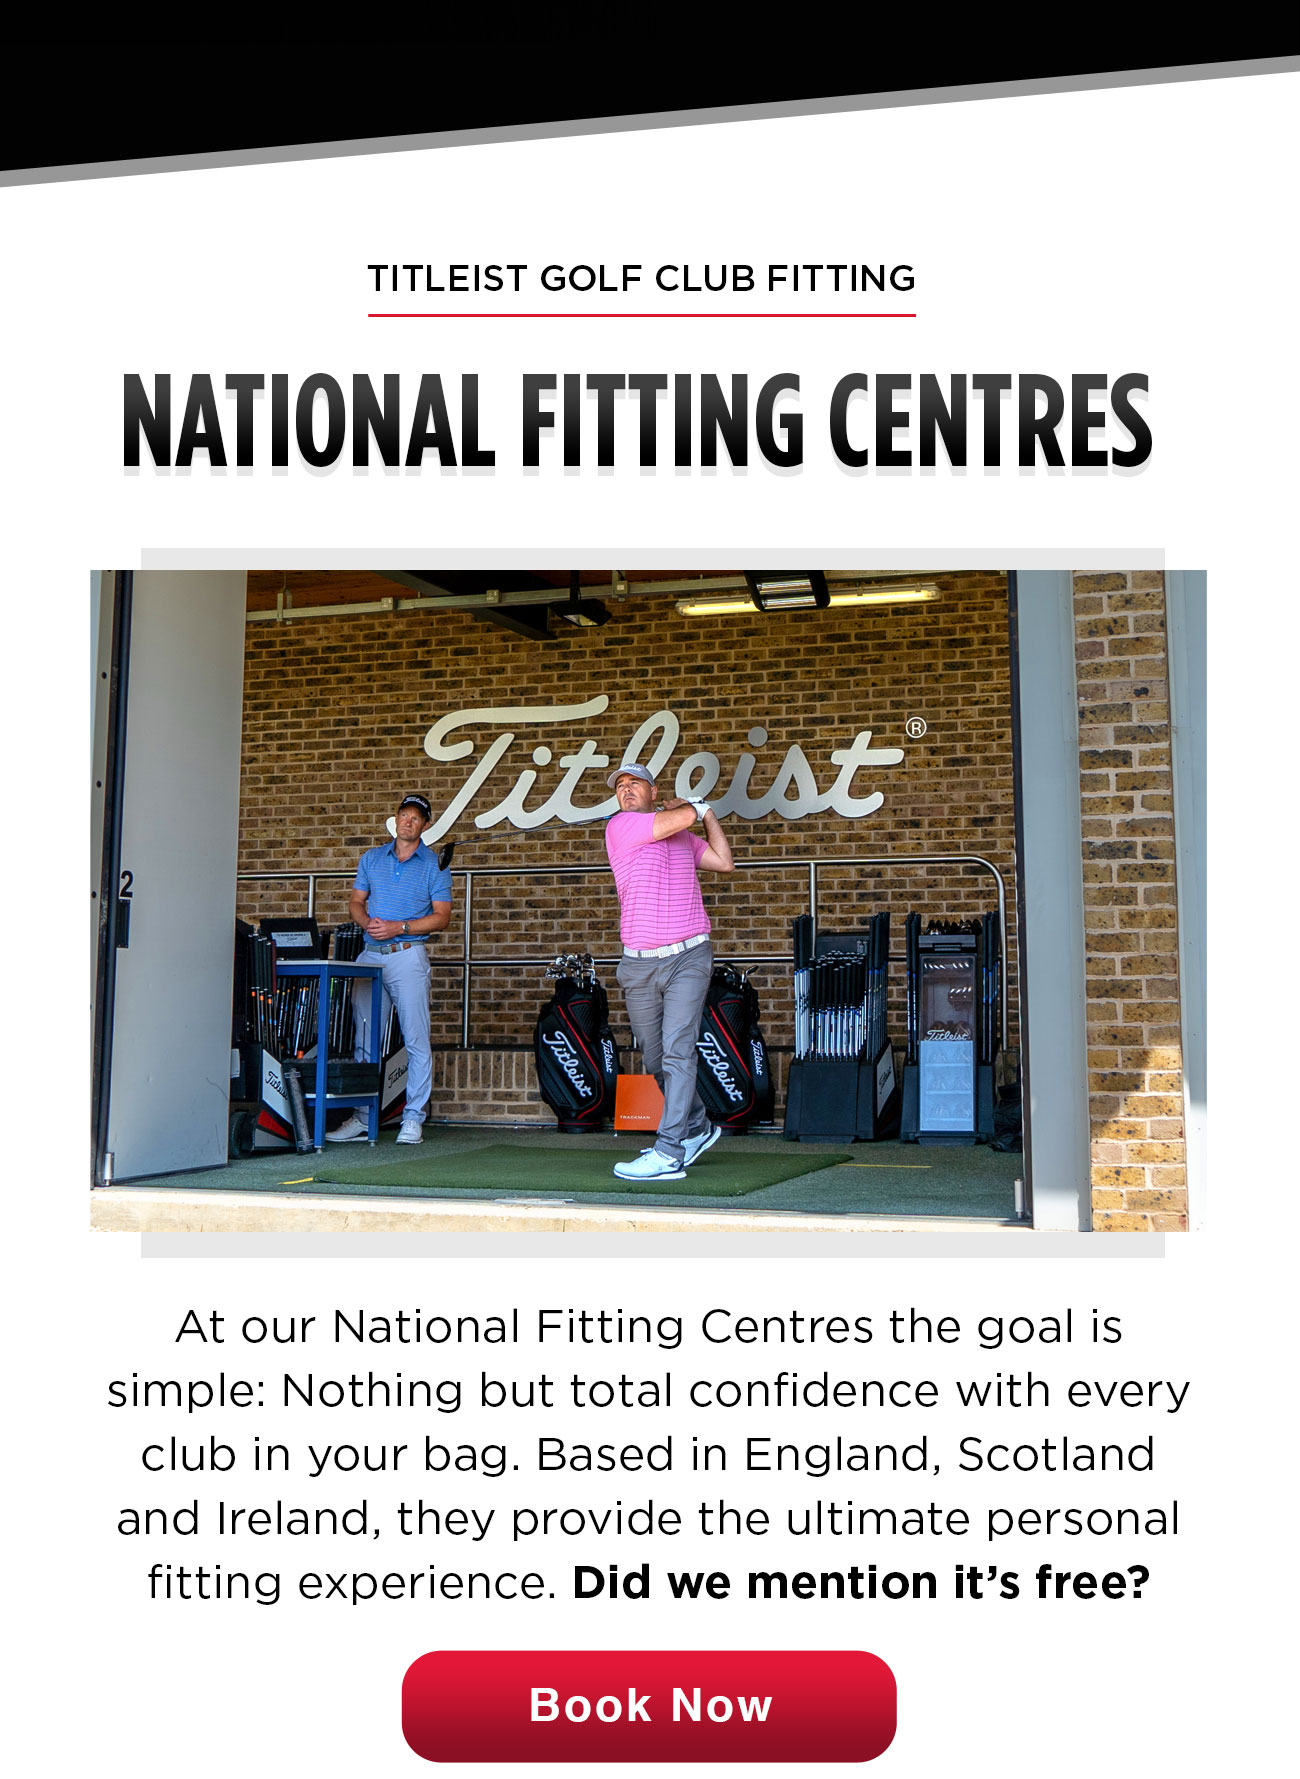 National Fitting Centres